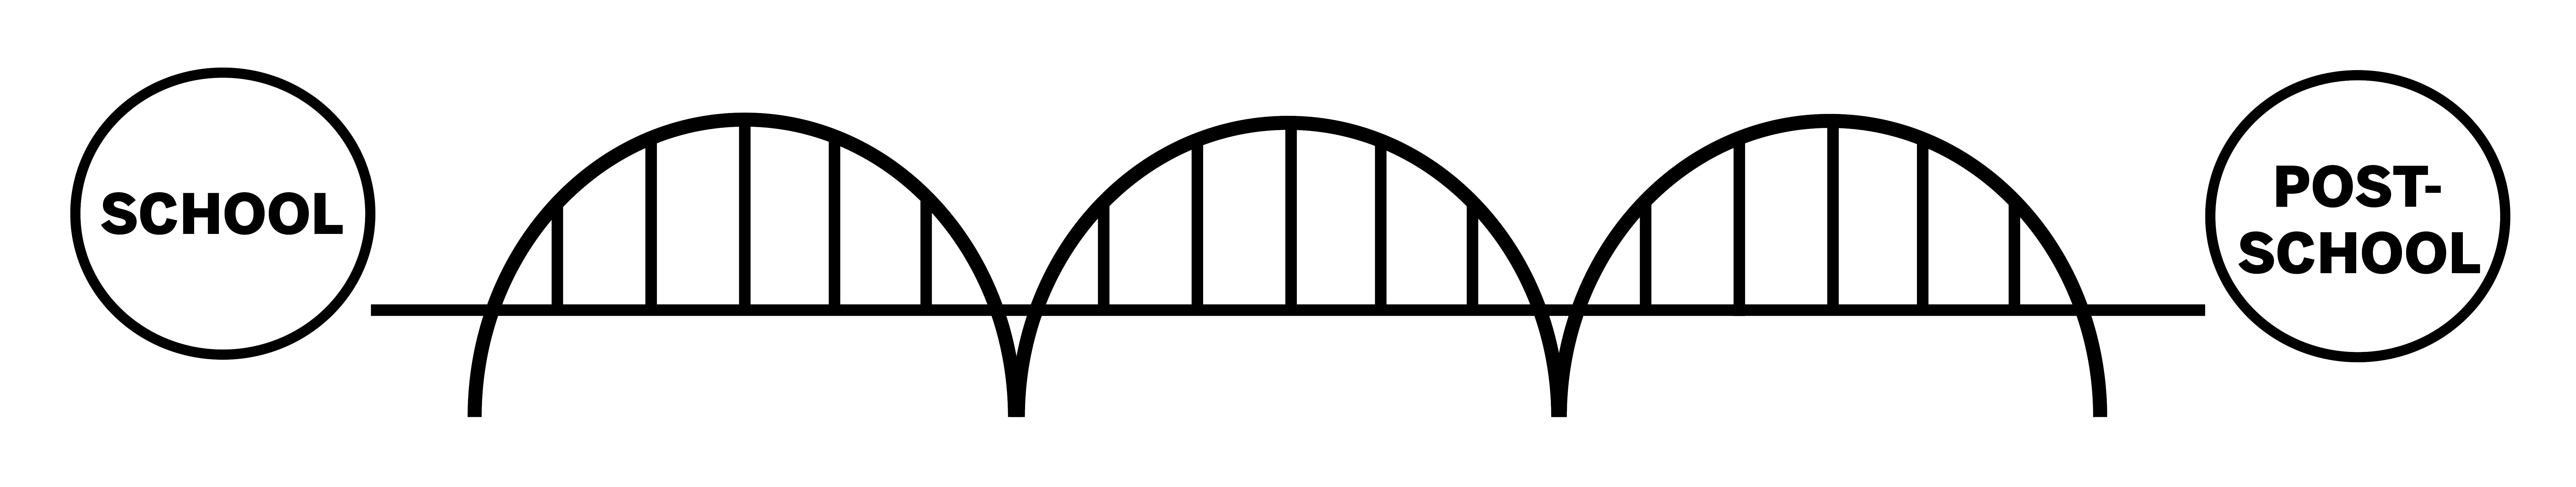 Image of an outline of a bridge, with "School" on the left side of bridge and "Post-School" on the right side of the bridge.